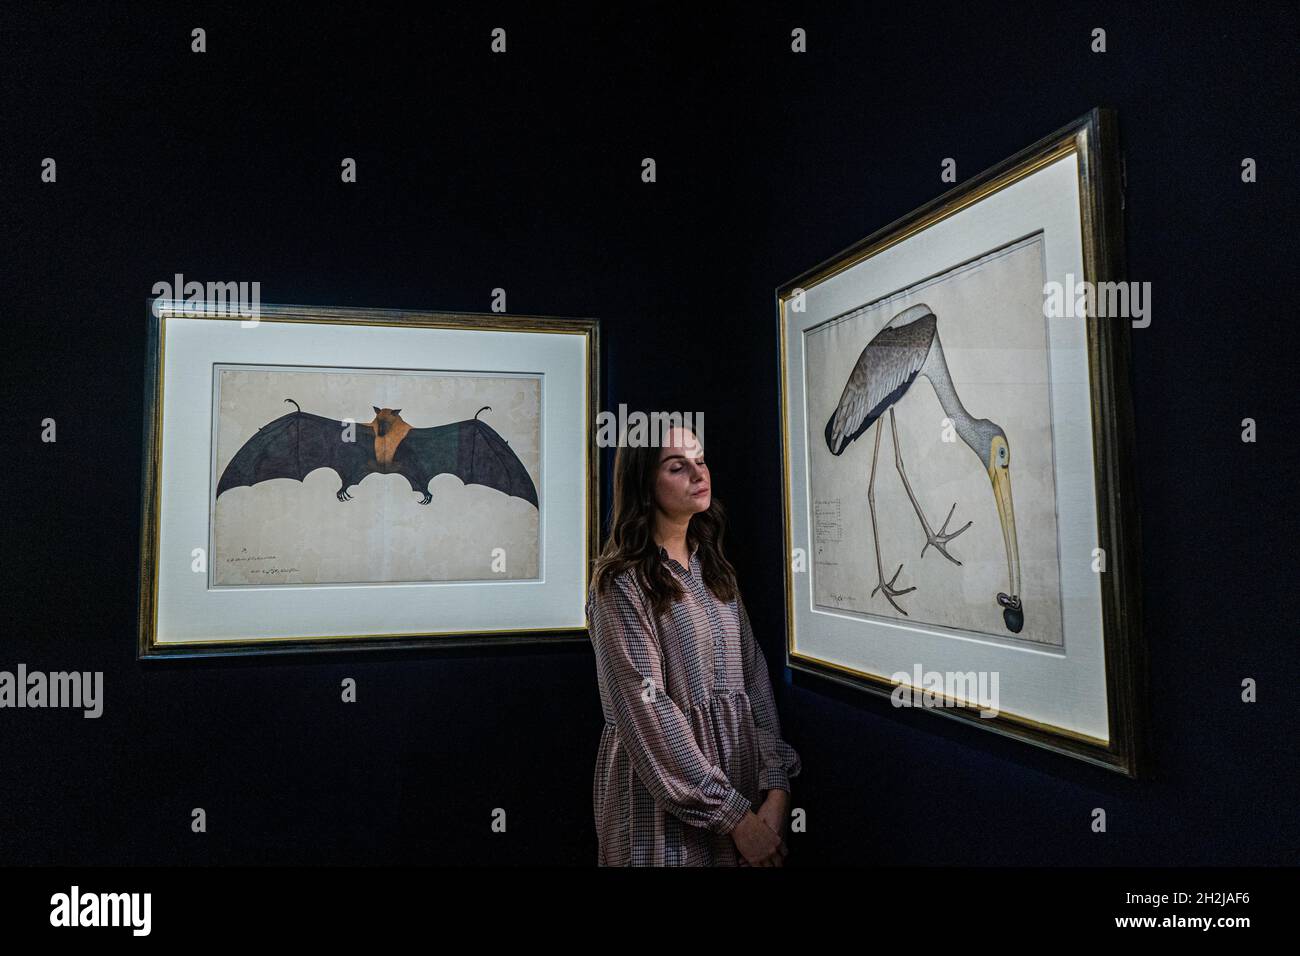 LONDON, UK. 22 Oct, 2021. A Great Indian Fruit Bat or Flying Fox, signed by Bhawani Das, Company School, Calcutta, circa 1778-83, Estimate: 300,000-500,000 GBP with A Painted Stork, eating a Snail, (both from the Impey Album), signed by Shaykh Zayn al-Din, Company School, Calcutta, dated 1781, Estimate: 200,000-300,000 GBP . Sotheby's Arts of the Islamic World & India auction which celebrates the production of historic objetcs, paintings and manuscripts from across a multitude of contincents and over ten centuries. The sale will take place on 27 OctoberCredit: amer ghazzal/Alamy Live News Stock Photo